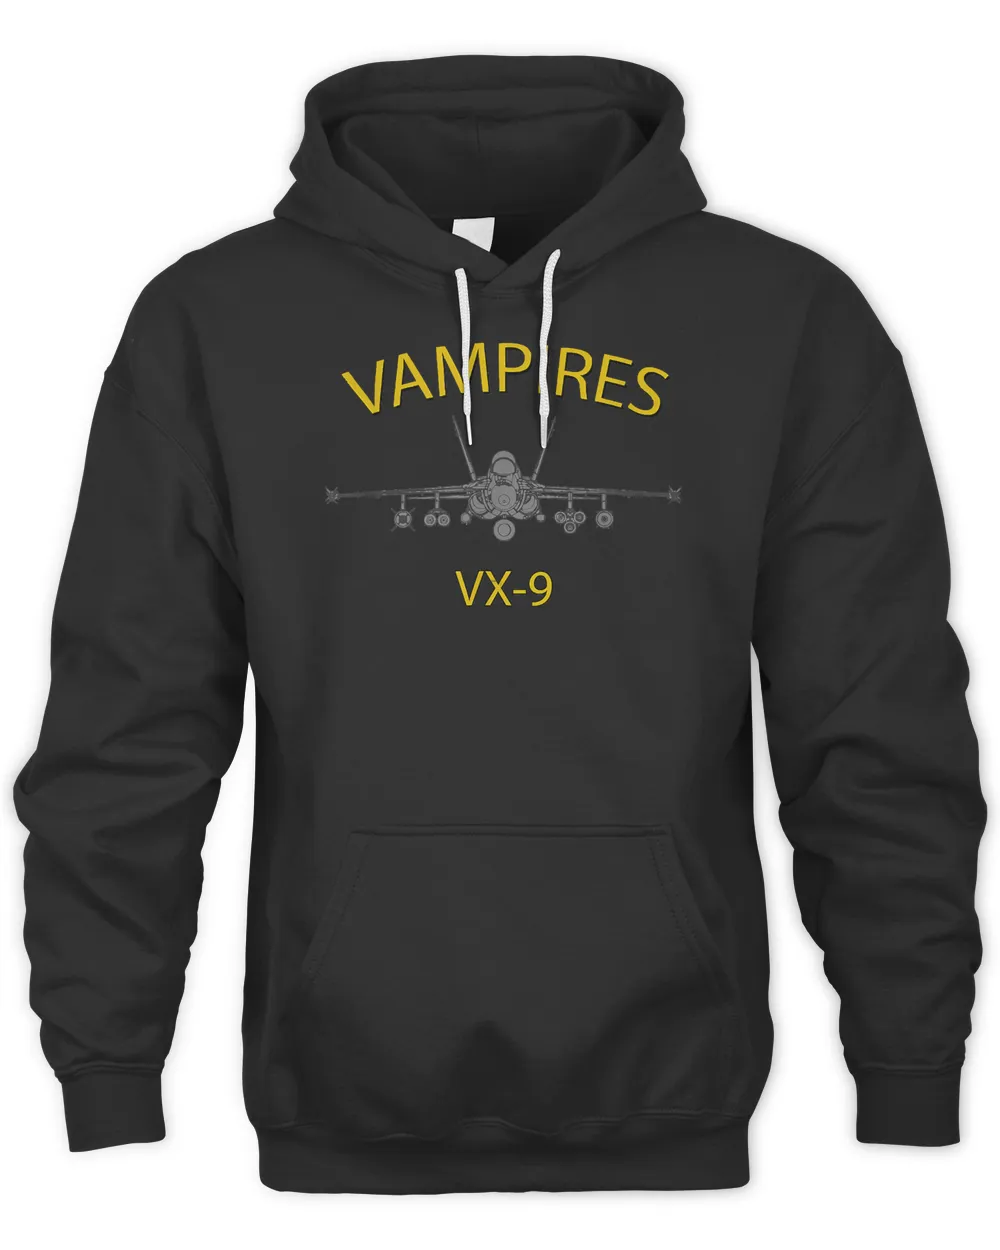 VX-9 Vampires Air Test and Evaluation Squadron F-18 T-shirt